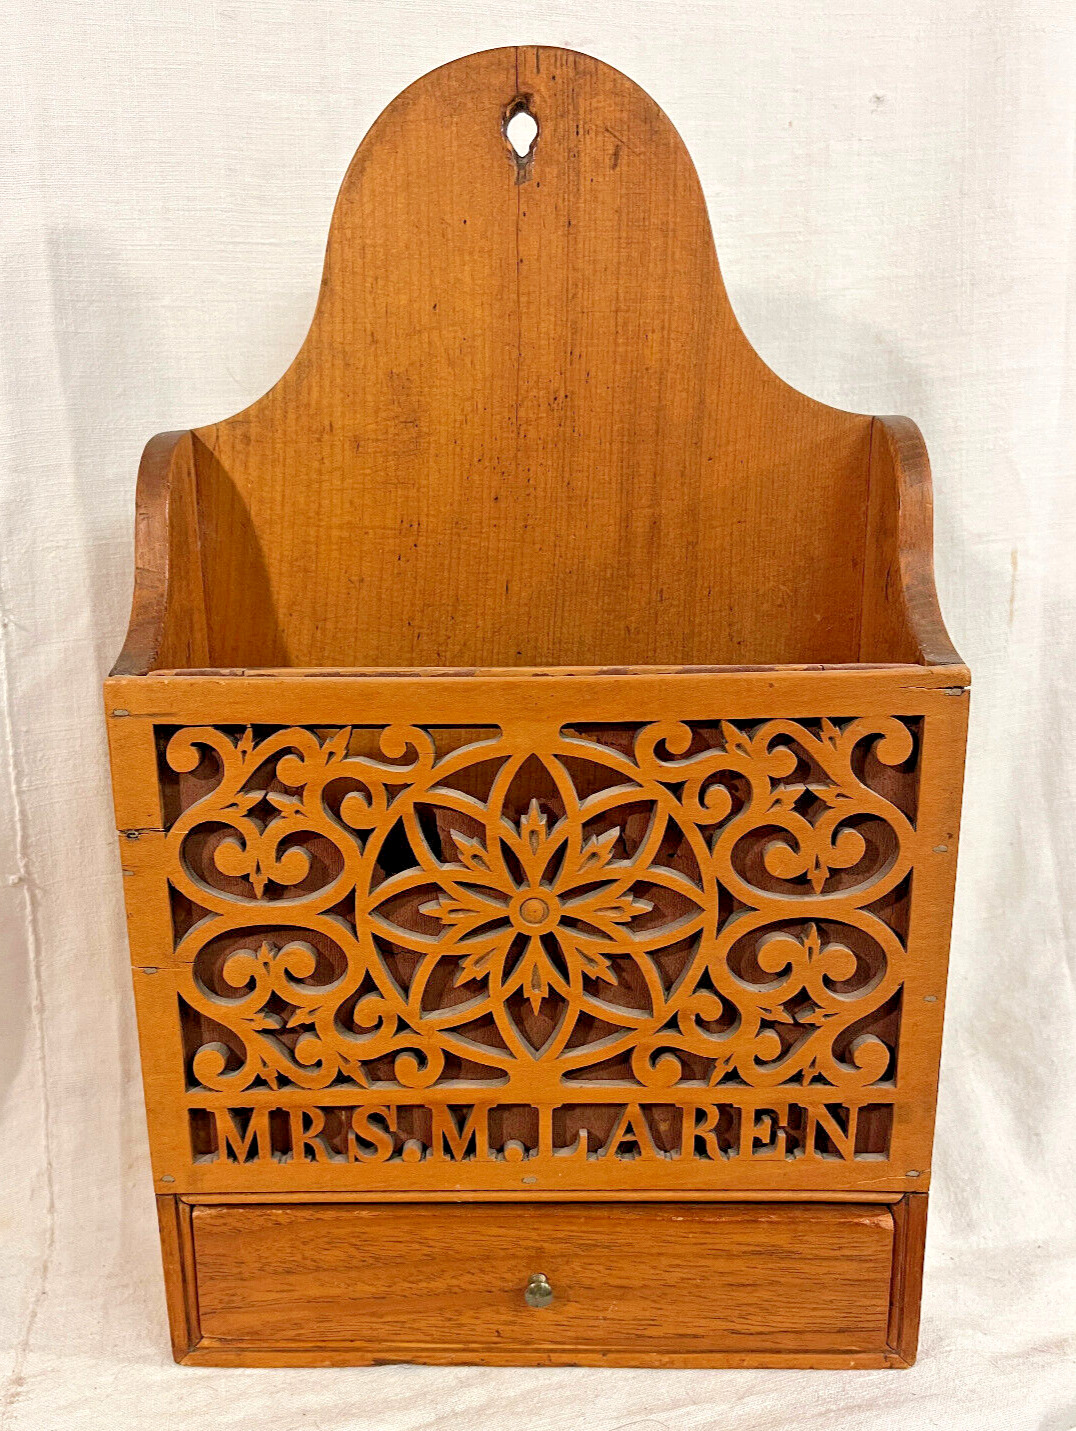 Antique Early American Hanging Wall Box, Cutout Scroll Work, prob. PA c 1830-50s